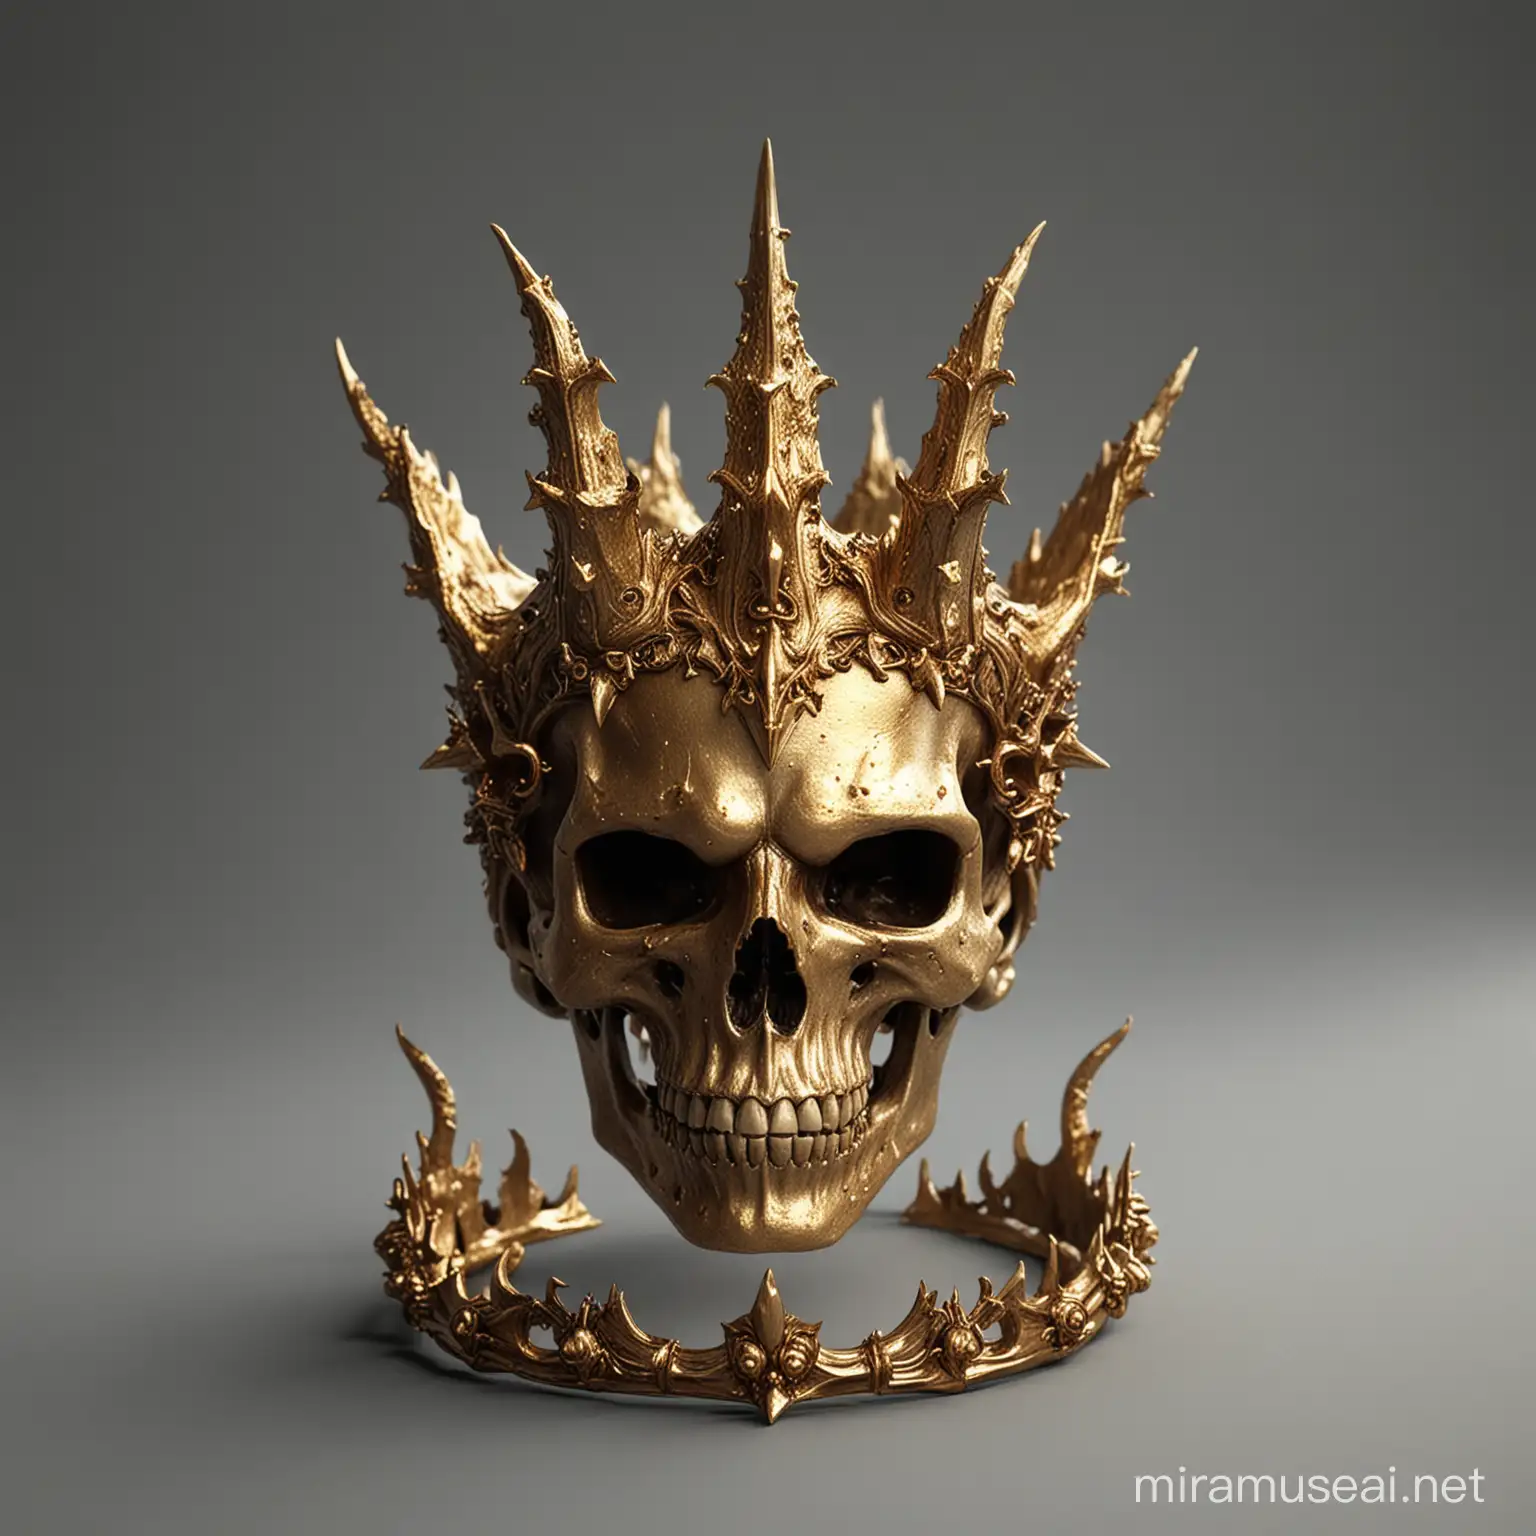 golden crown made out of small demon horns